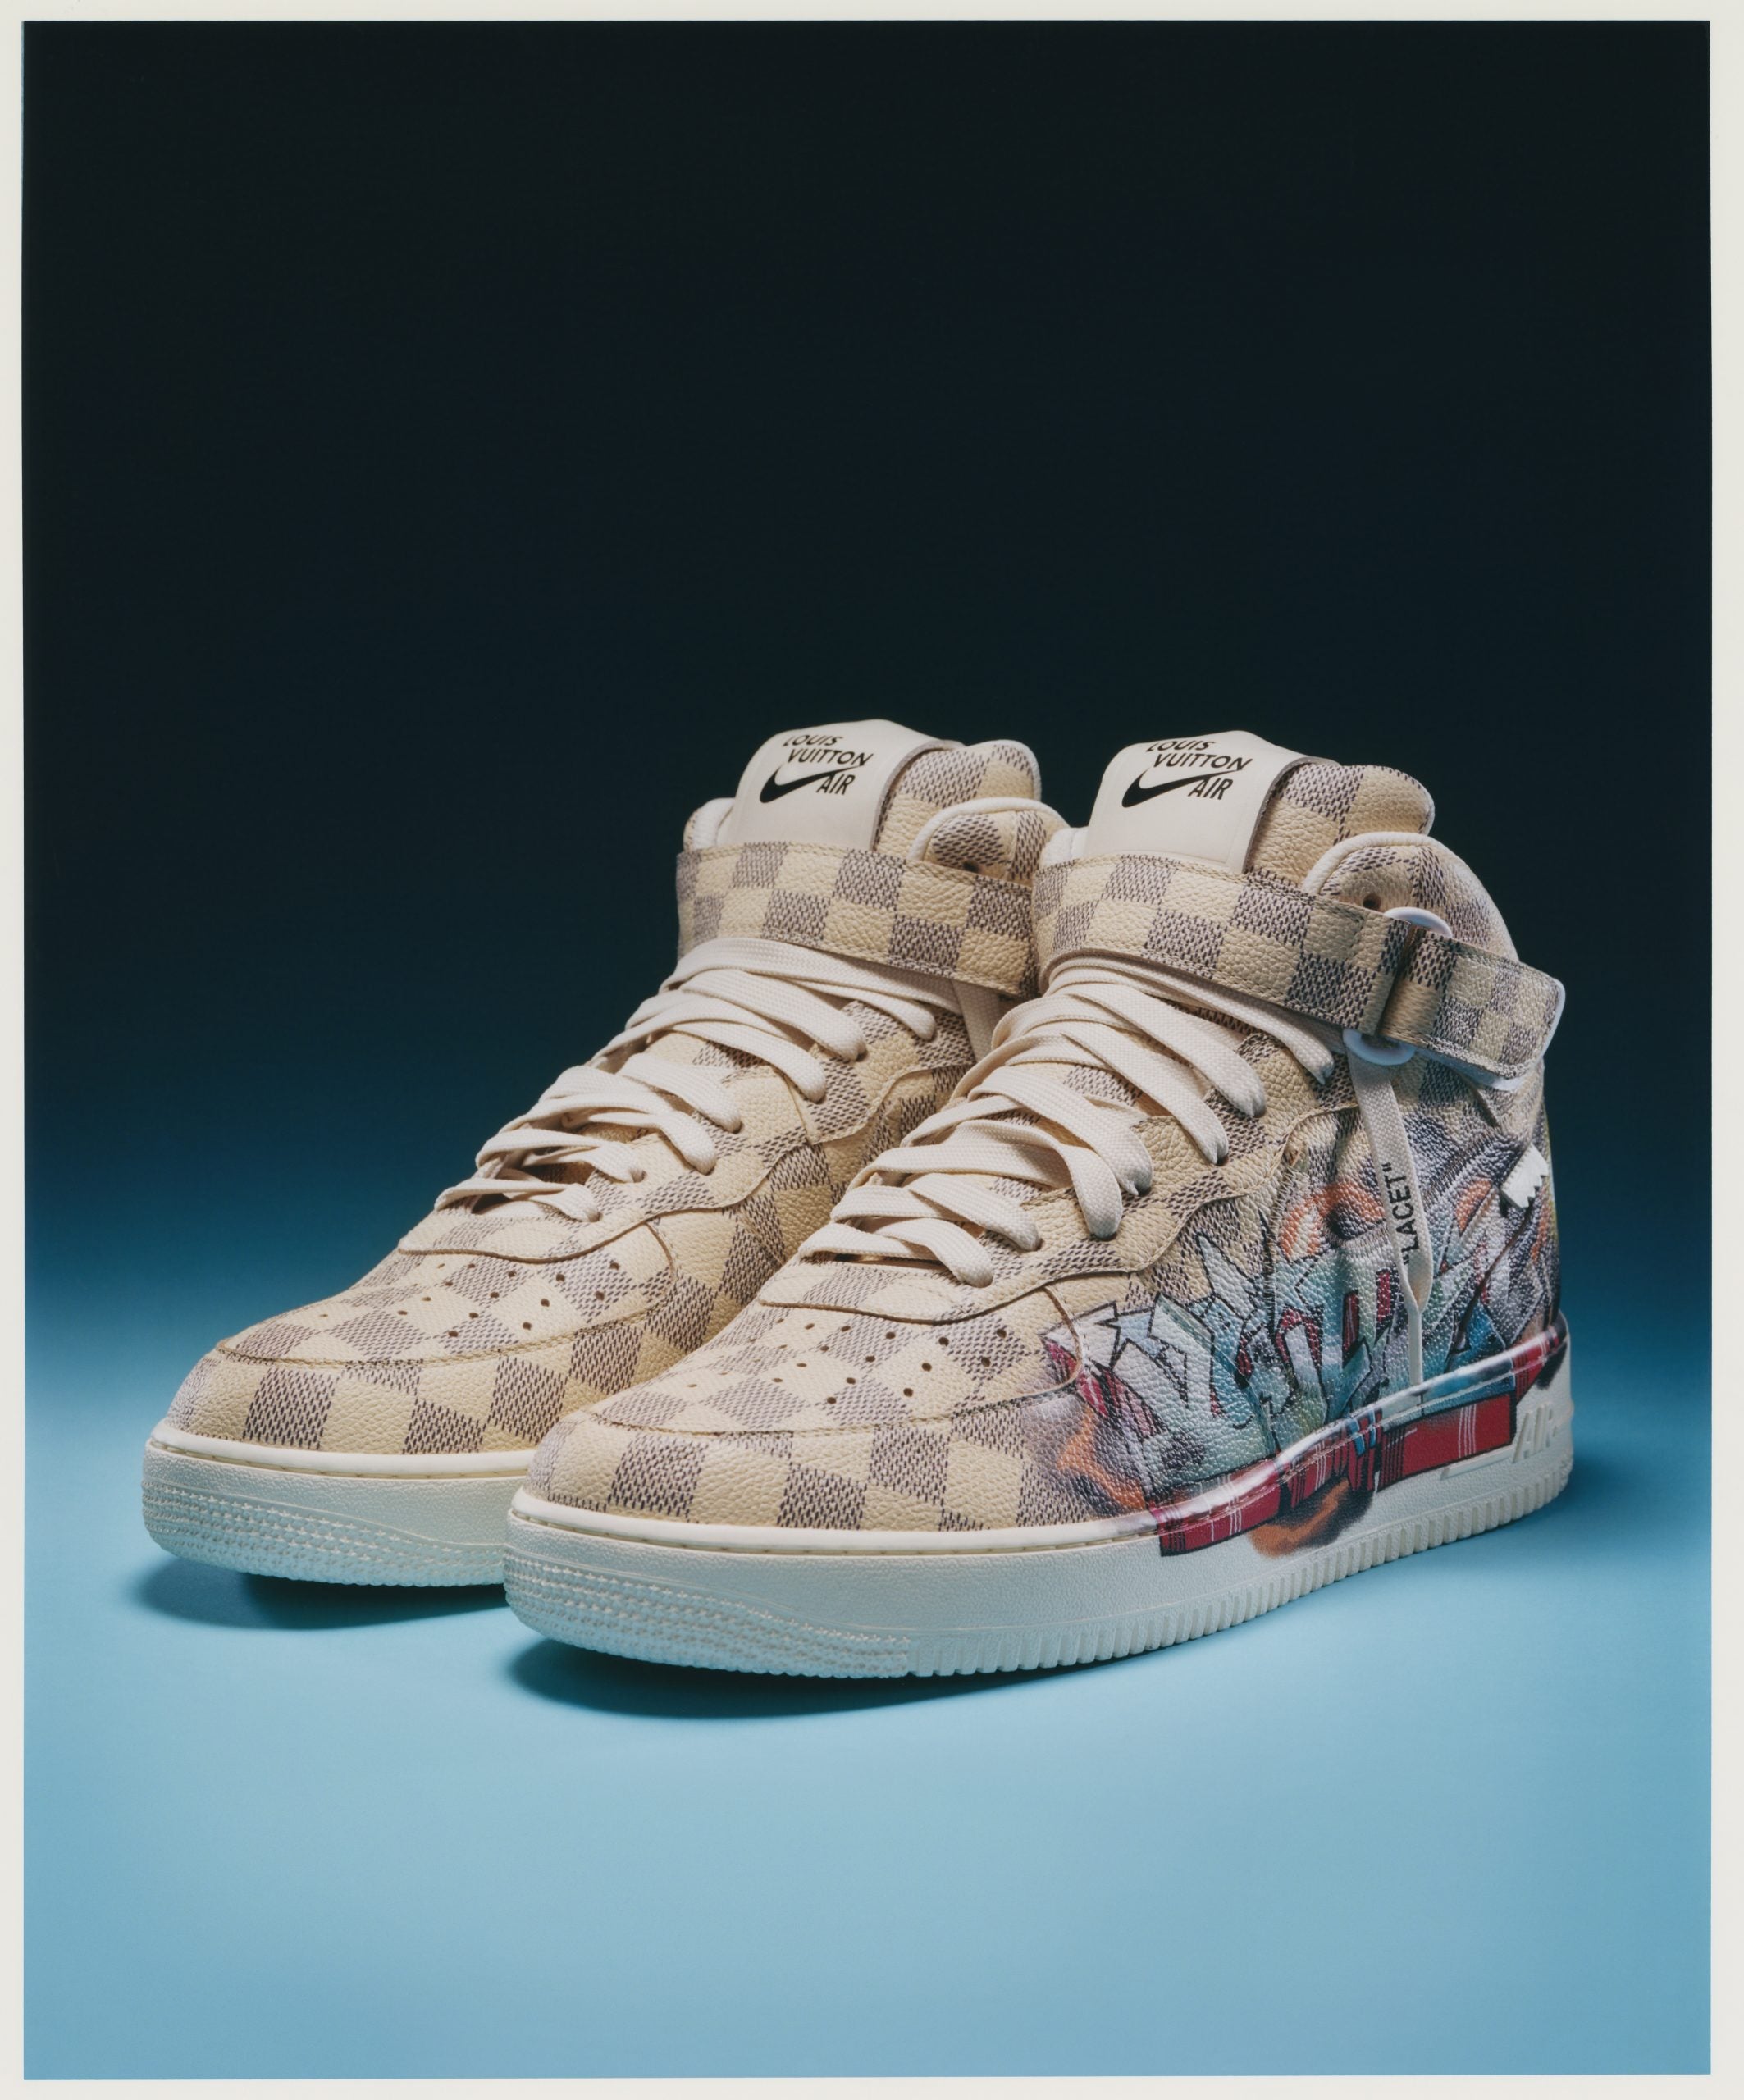 Louis Vuitton x Nike “Air Force 1” by Virgil Abloh NYC Launch and